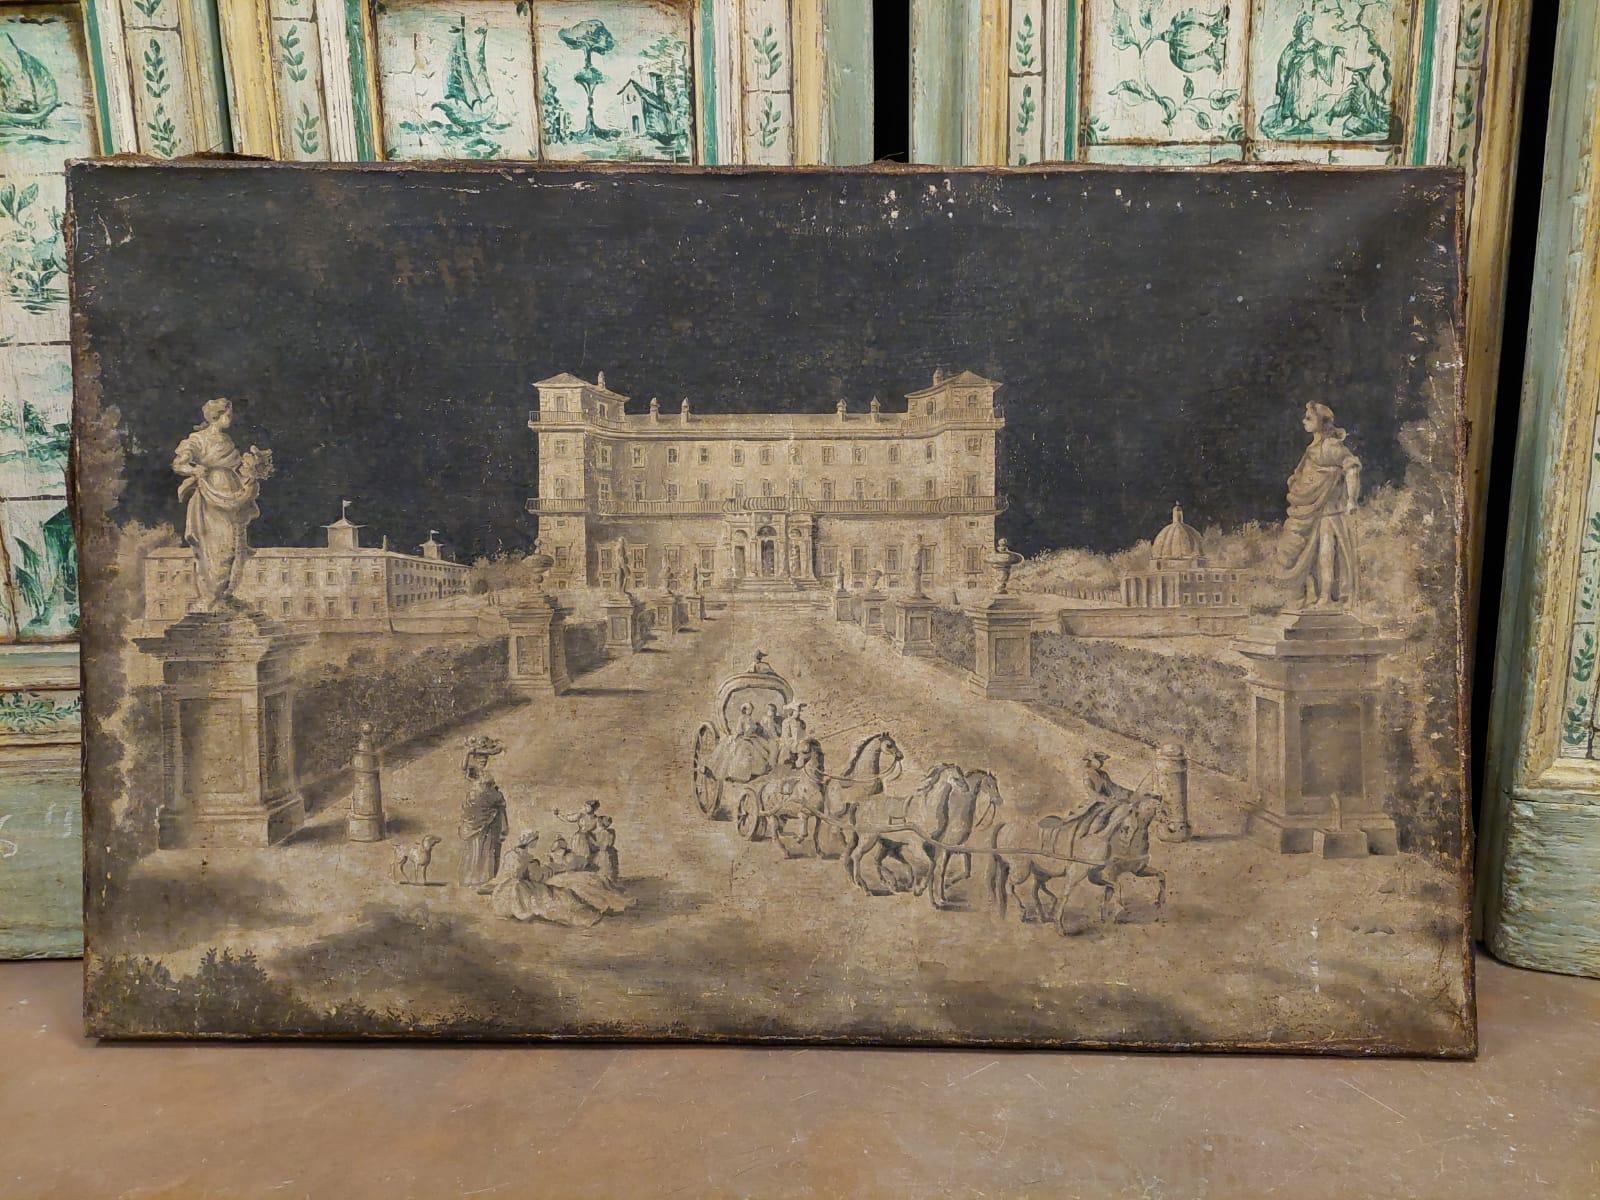 Ancient oil painting on canvas, depicting a life scene in an 18th century noble villa and its architecture, painted in black and white as it served as a preparatory sketch for an engraving, painted by Italian engraver Giuseppe Zocchi, as a study